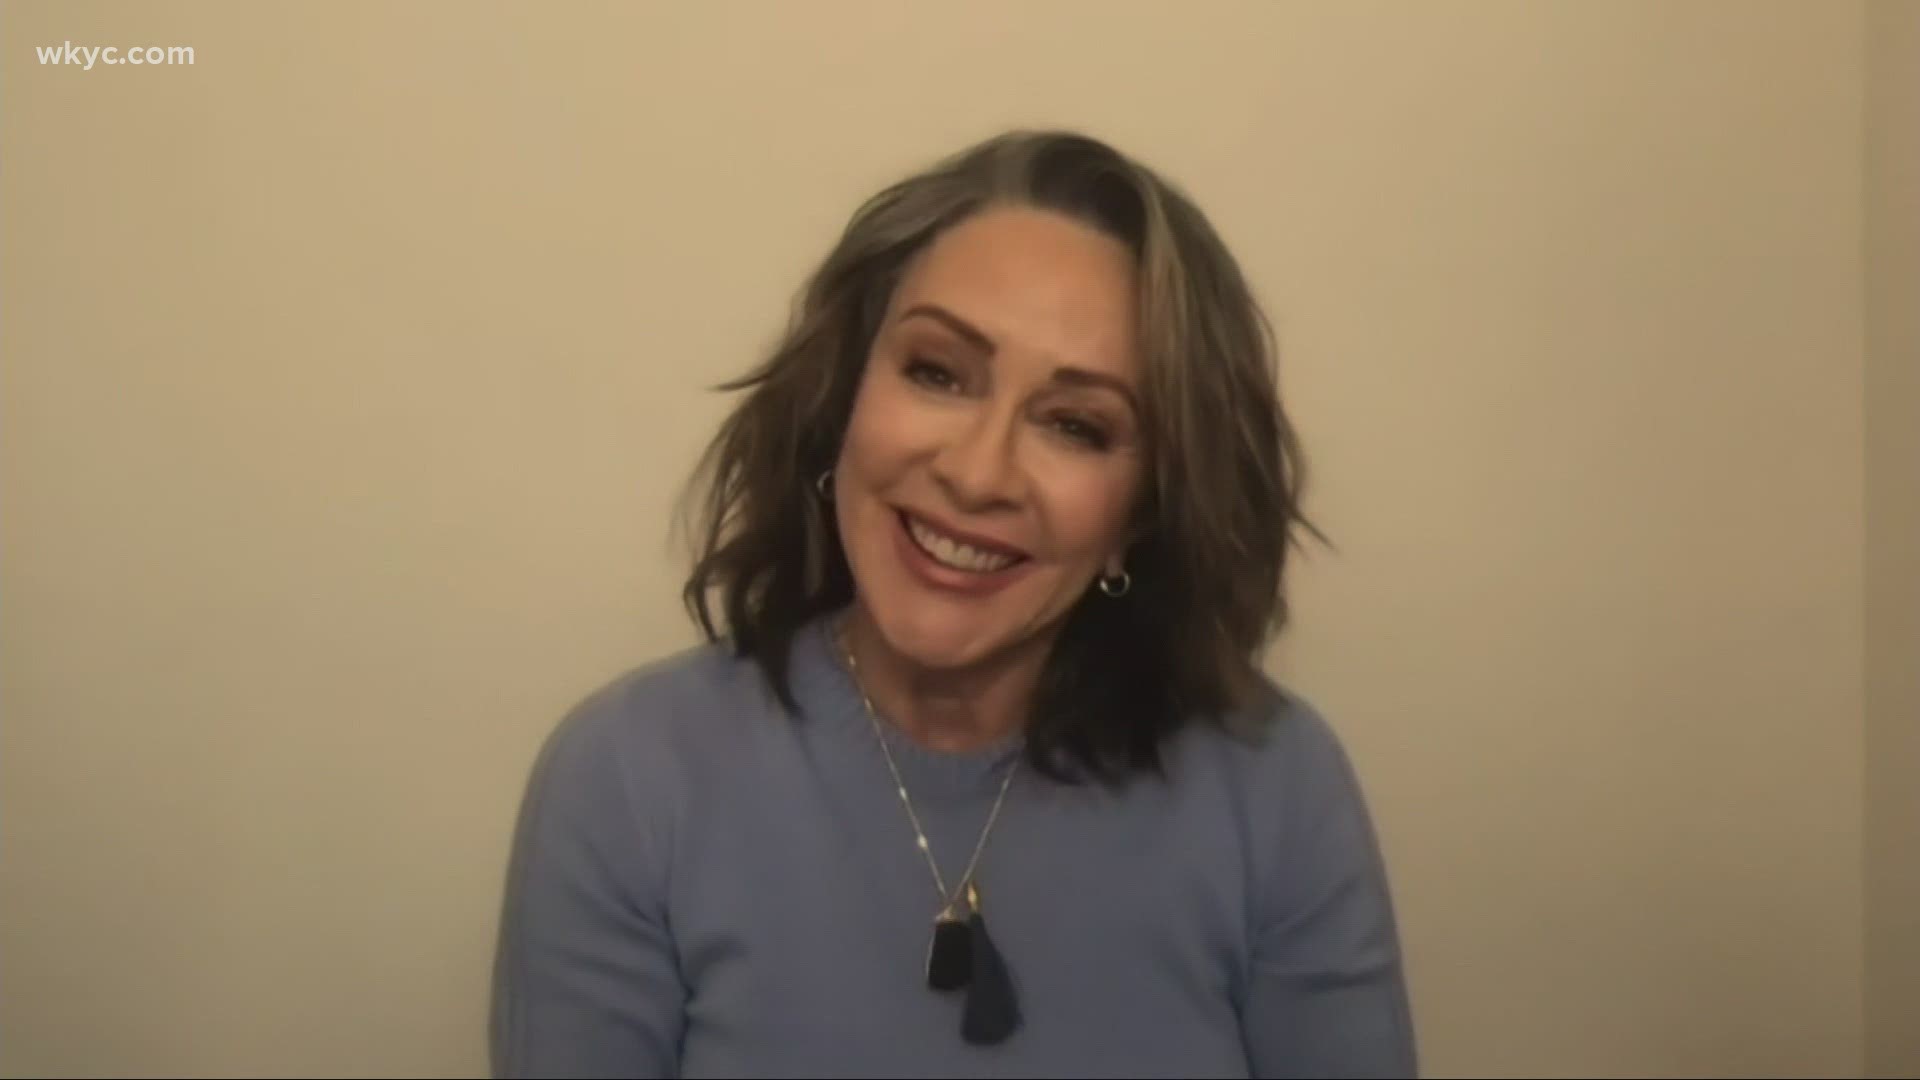 Northeast Ohio's own Patricia Heaton talks with 3News' Maureen Kyle about her memories of Bay Village and her contributions to World Vision.